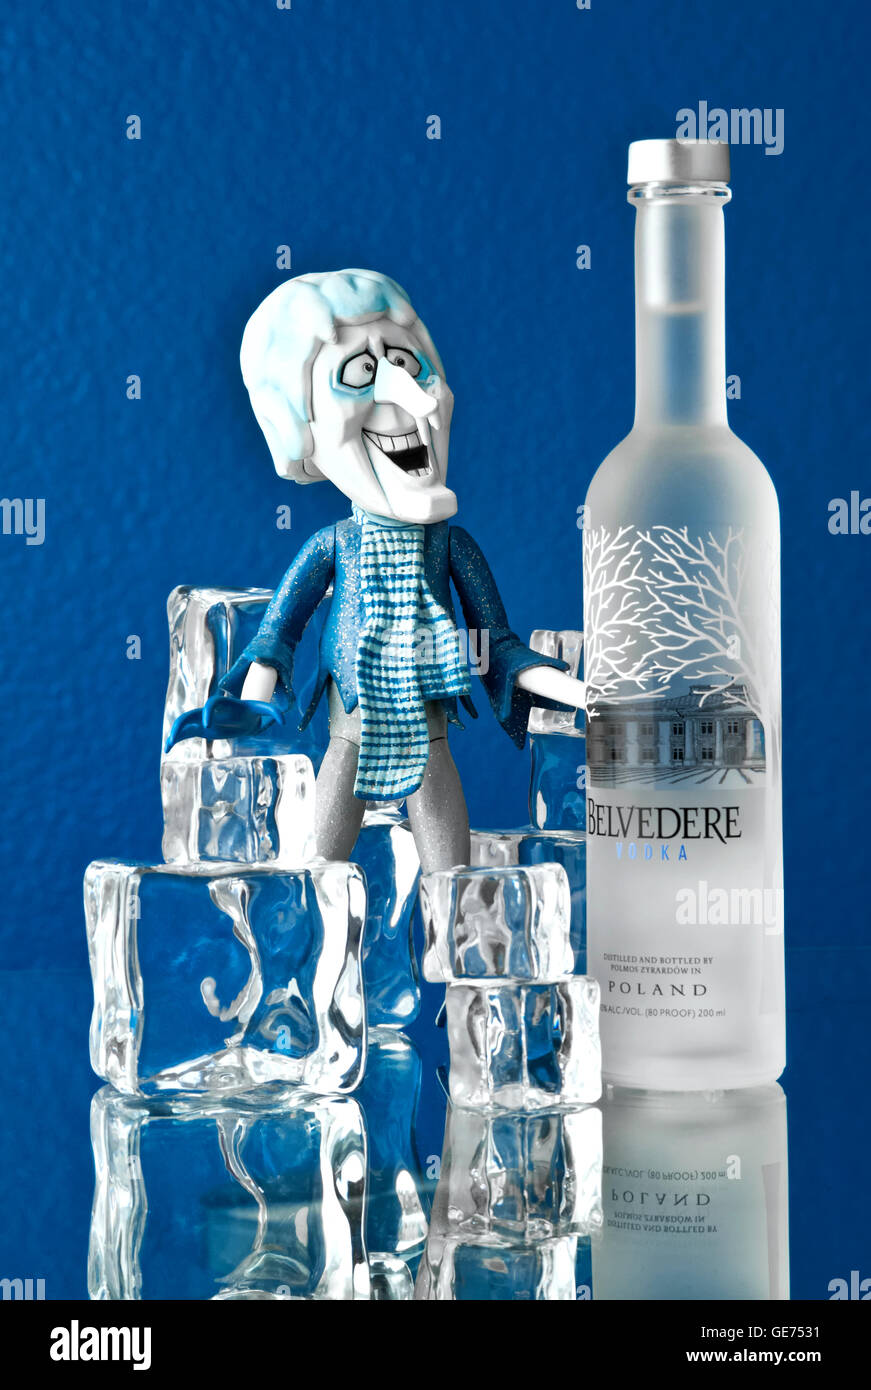 Belvedere vodka Black and White Stock Photos & Images - Alamy